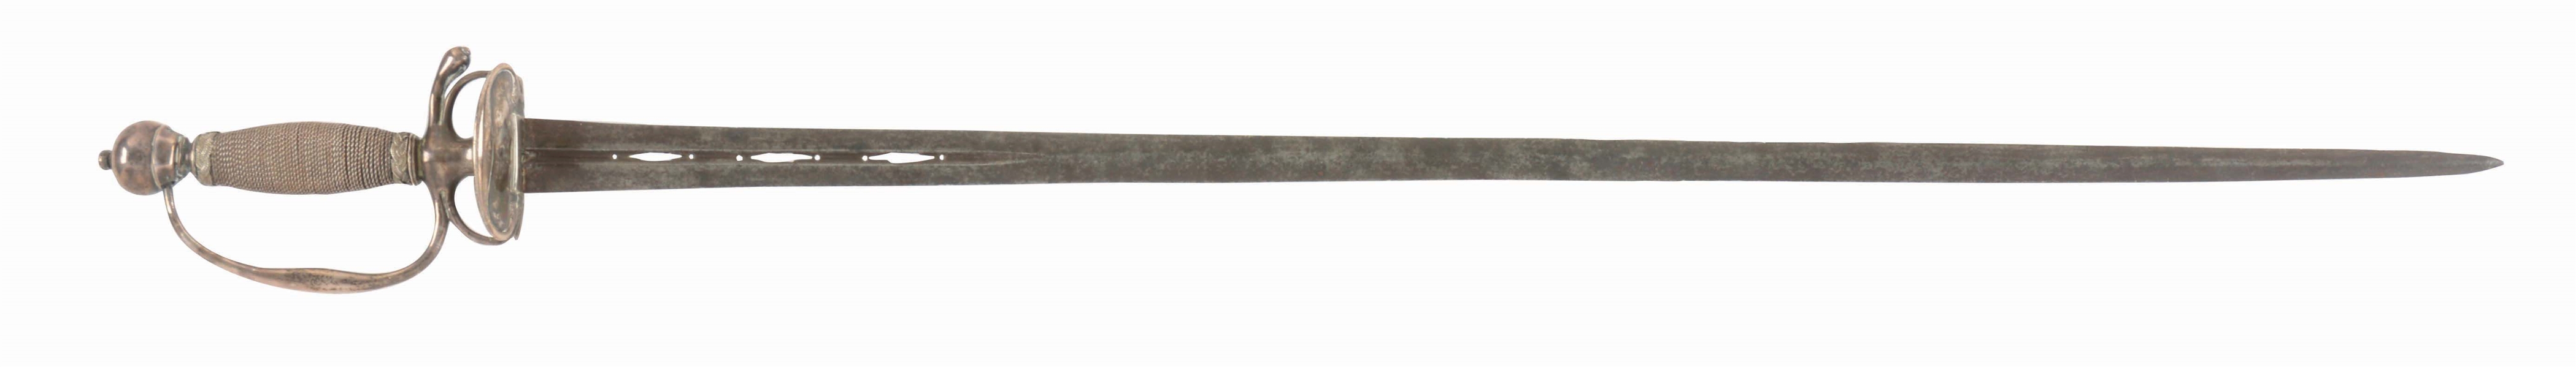 EARLY AMERICAN SILVER-HILTED SMALL SWORD WITH PIERCED BLADE BY DAVID HALL.